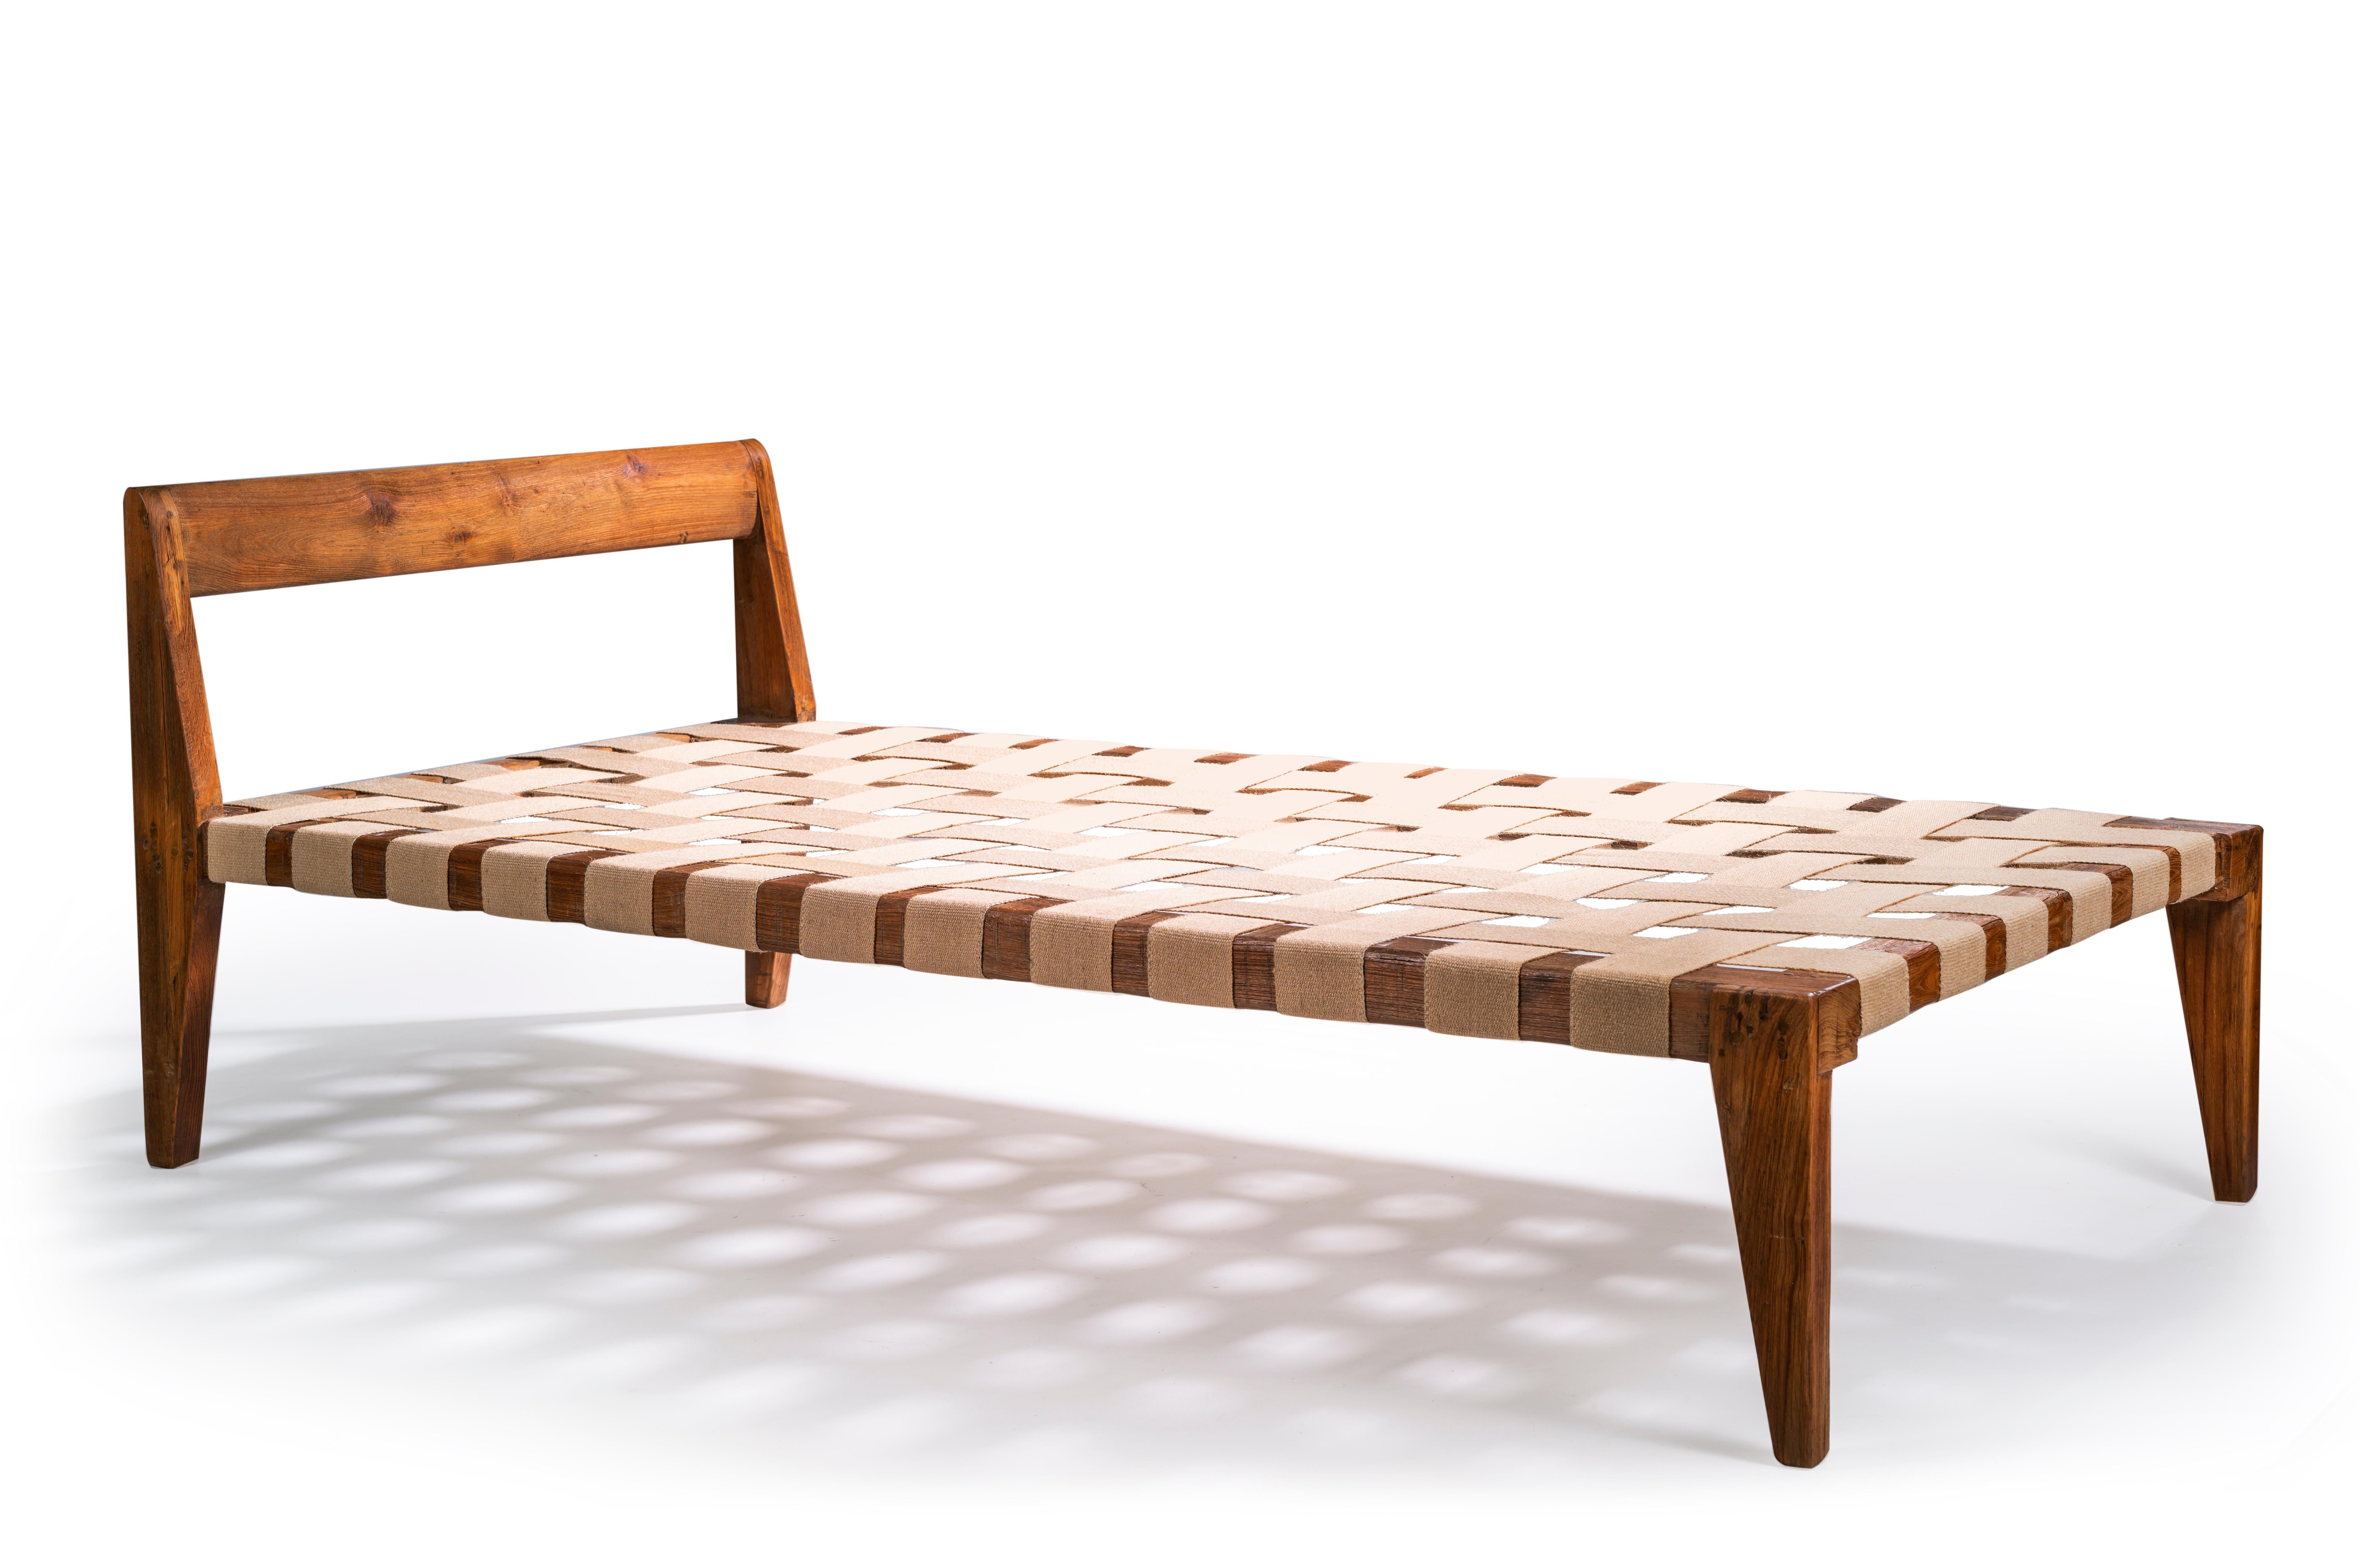 Mid-20th Century Pierre Jeanneret, Bed PJ-L-03-A, circa 1957